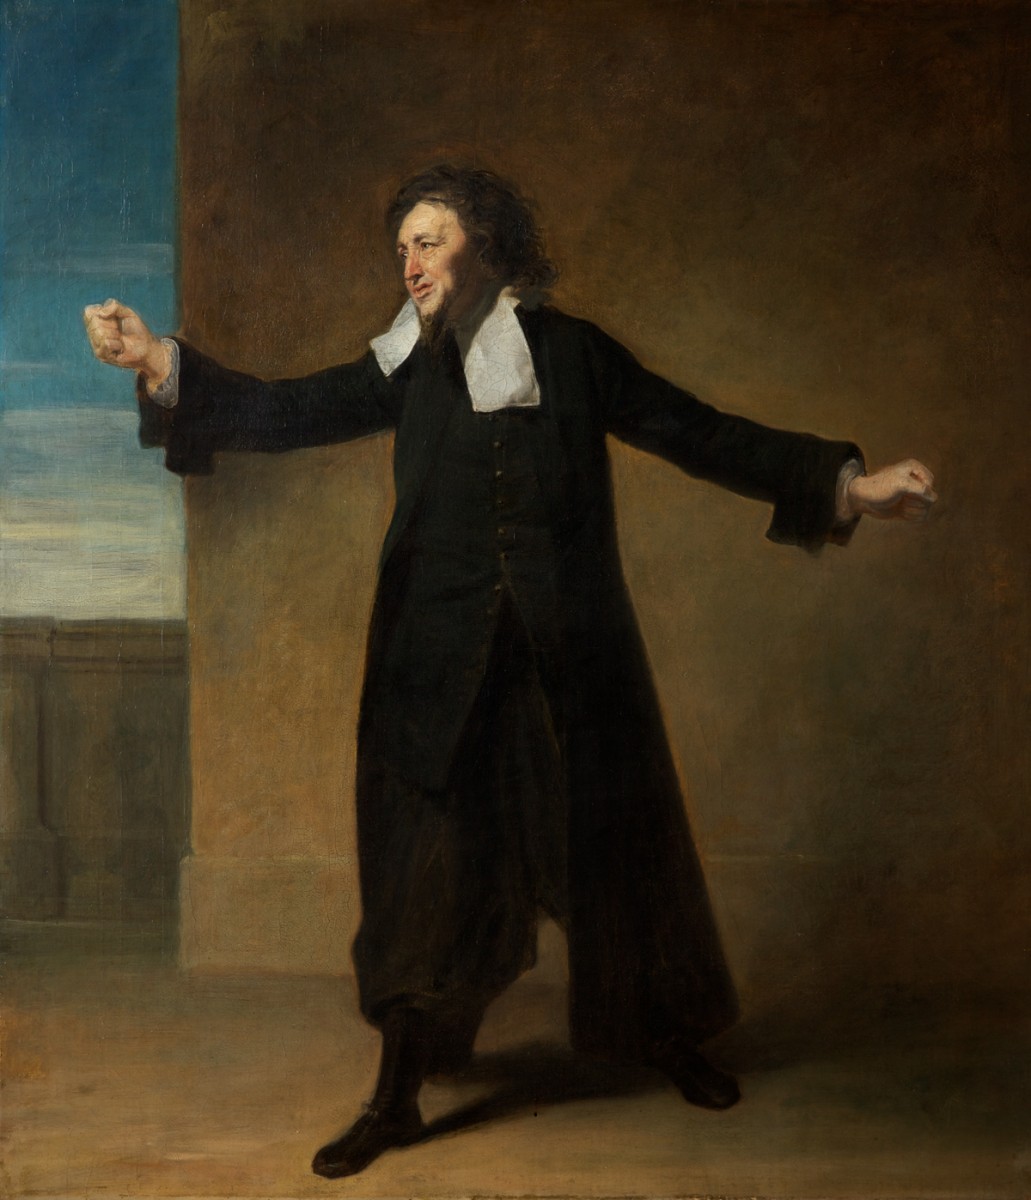 Charles Macklin as Shylock in Shakespeare's 'The Merchant of Venice', Covent Garden, 1767/1768